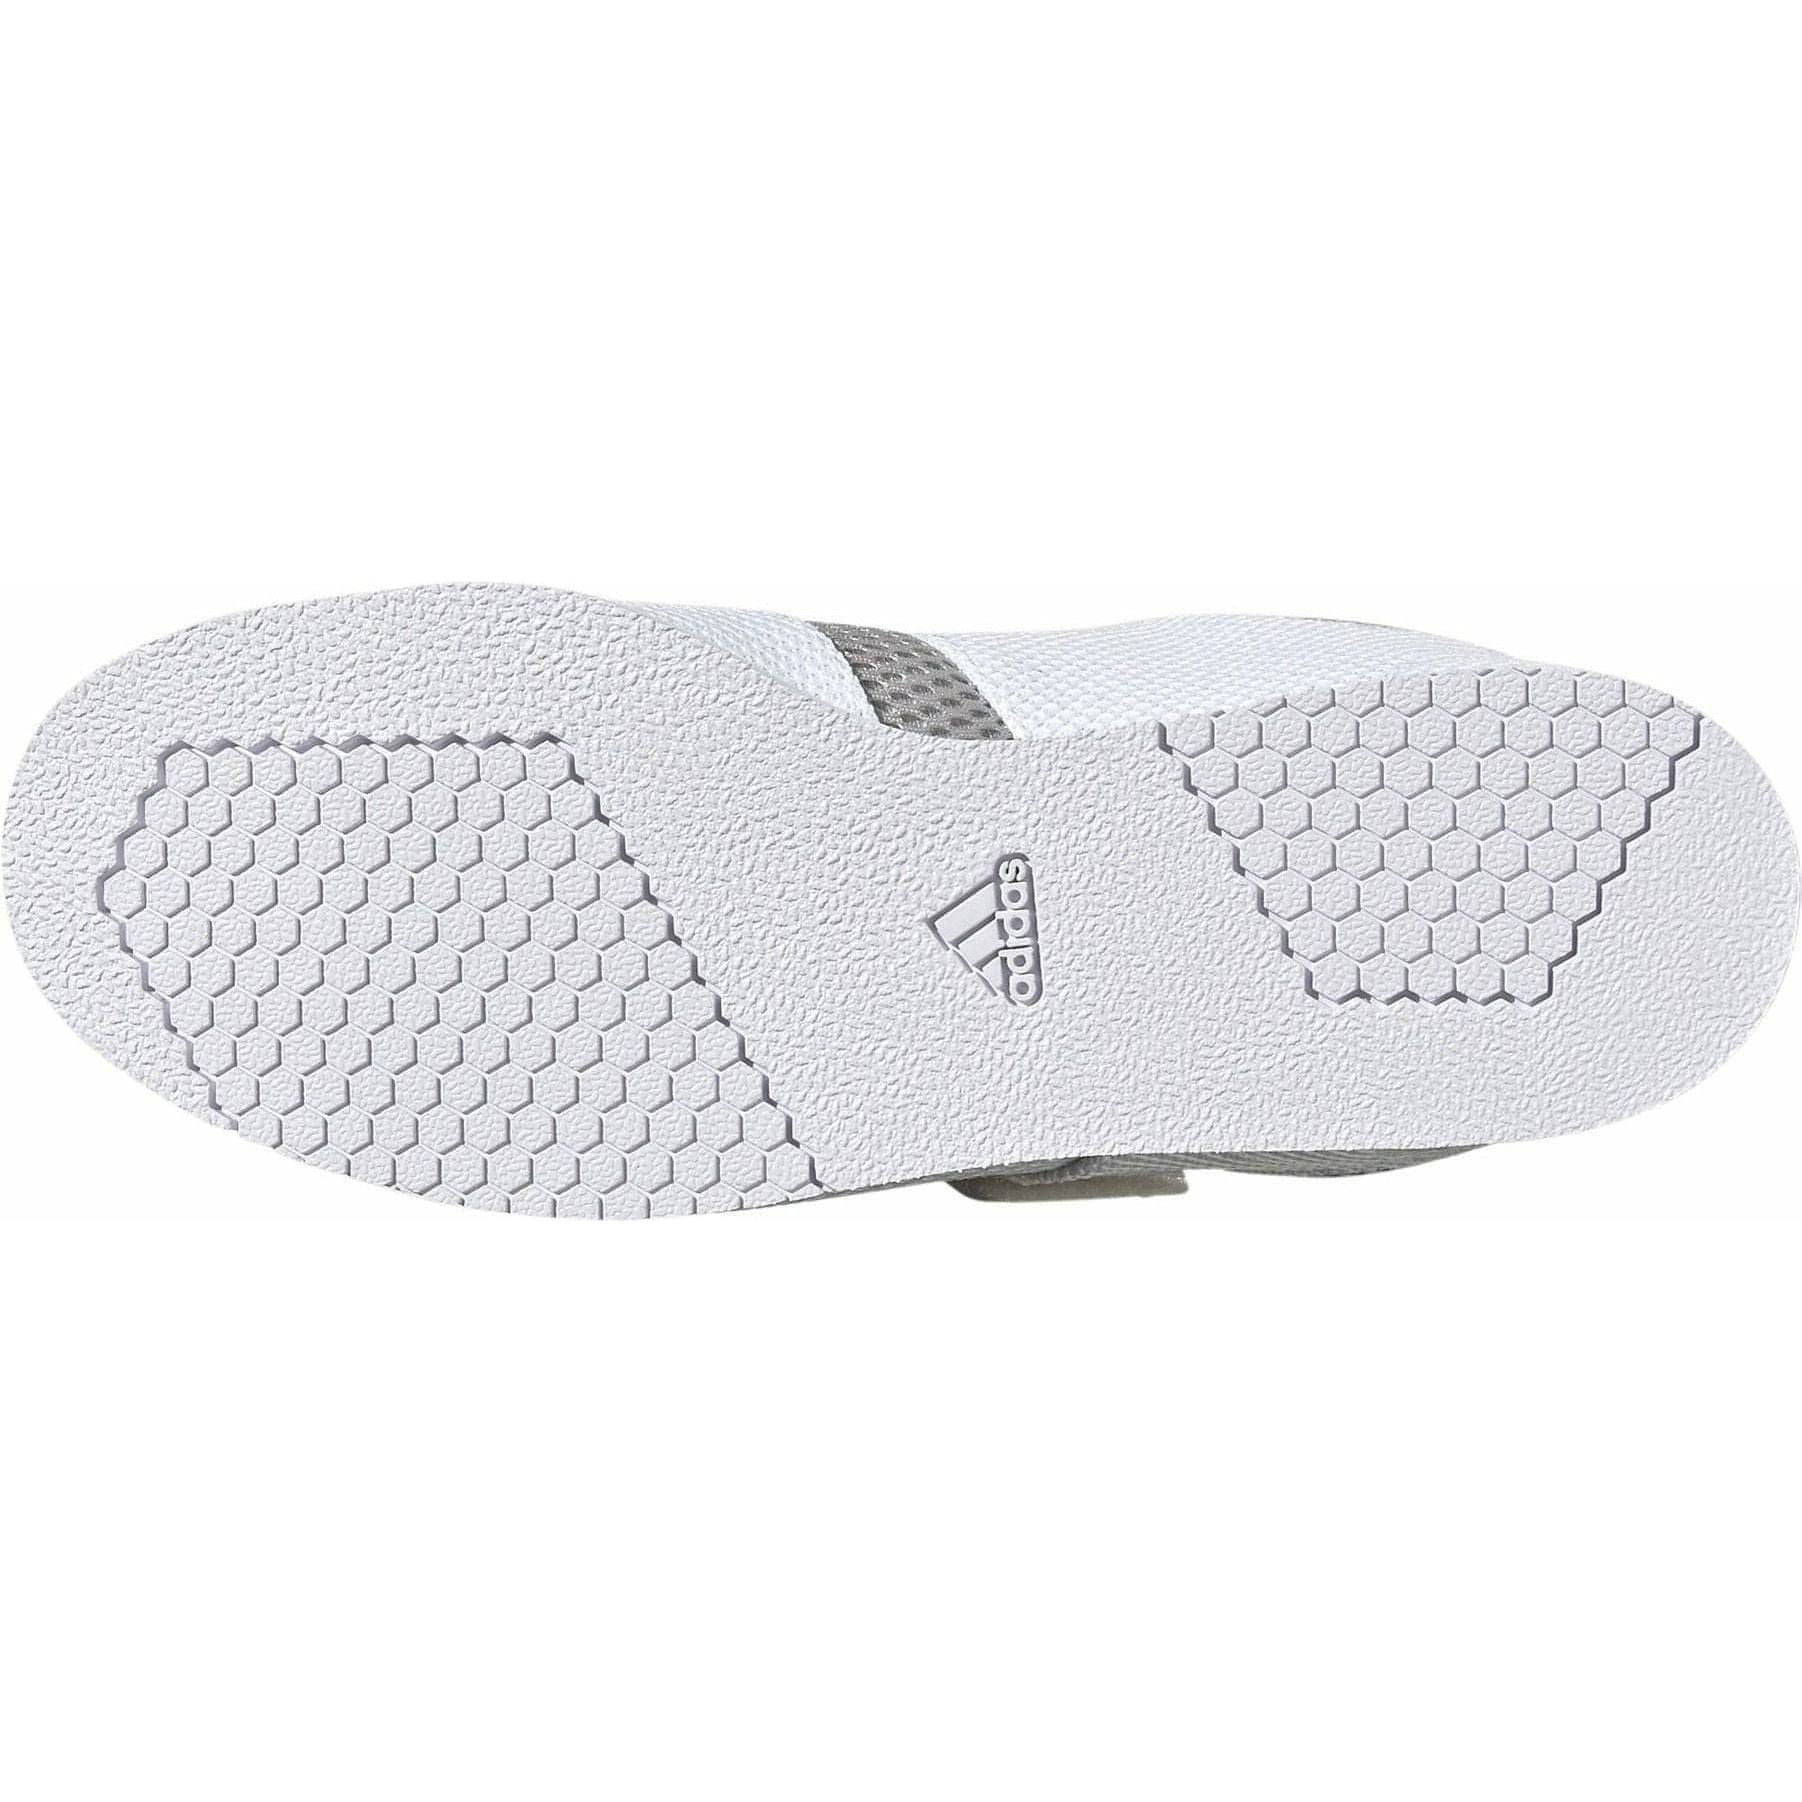 adidas Powerlift 5 Mens Weightlifting Shoes - White - Start Fitness